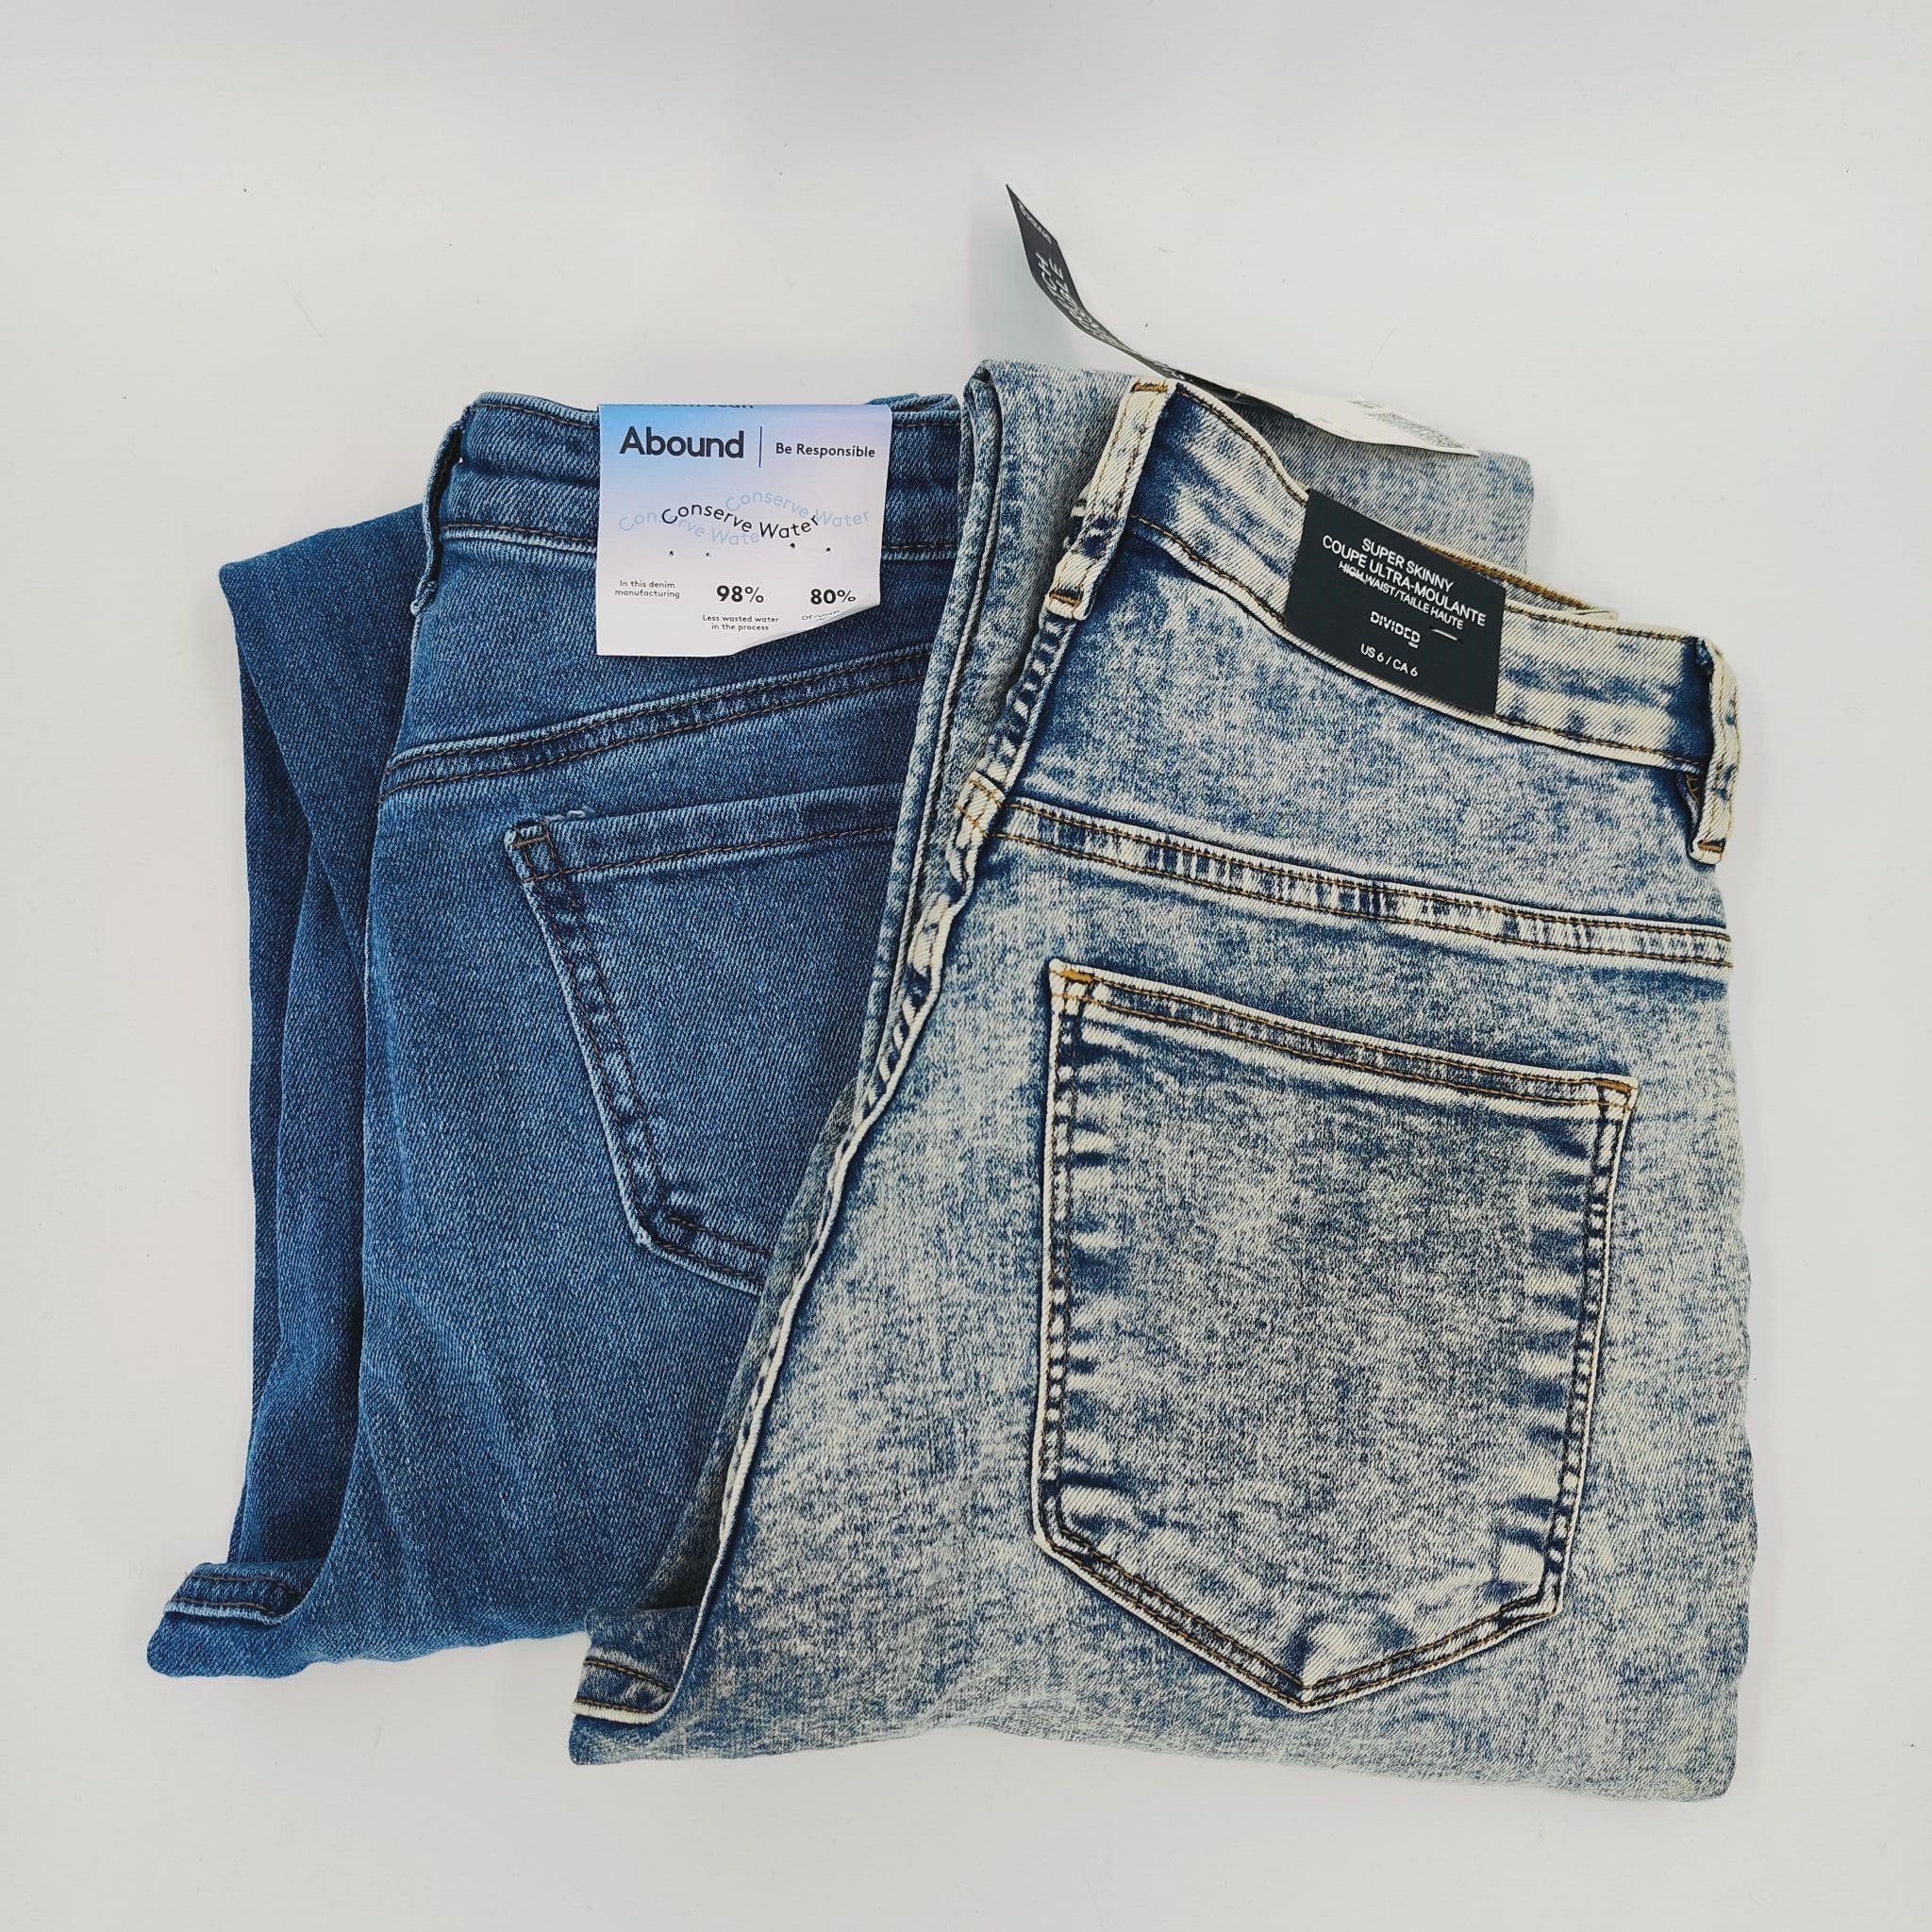 New Women's Jeans Divided & Abound